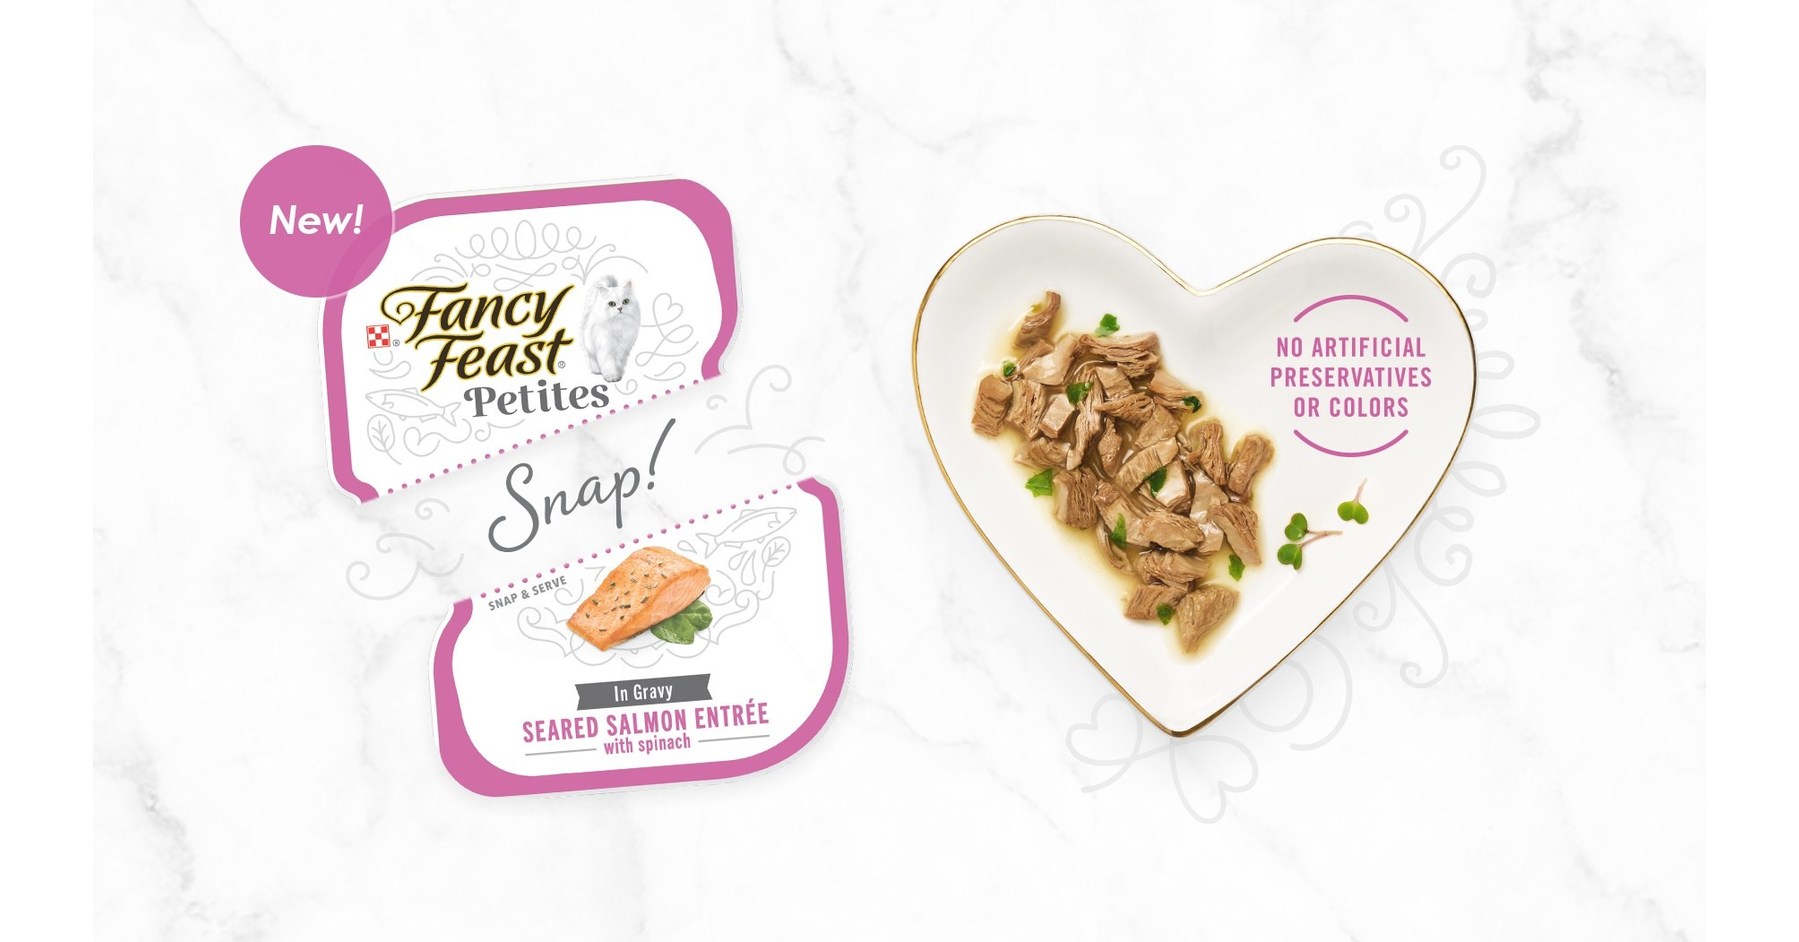 Fancy Feast Releases Petites Feast Cookbook- A Recipe Information for People Impressed by Their New Single Serve Entrees for Cats